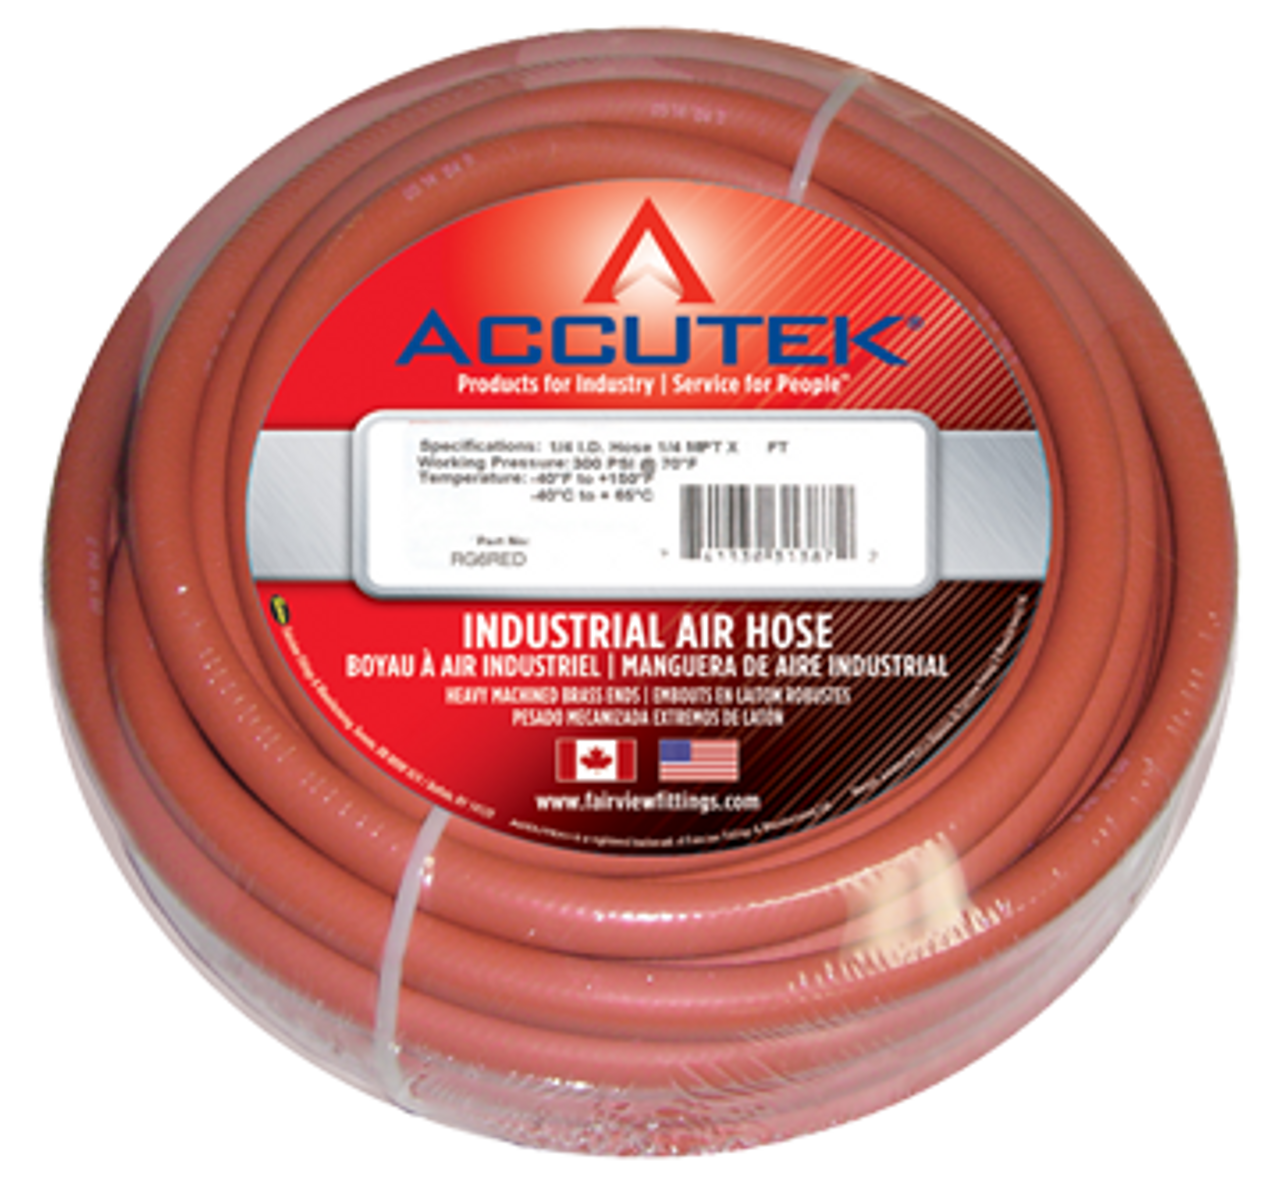 1/4 x 1/4" x 100' Red EPDM 200 PSI Rubber Air Hose Assembly - Brass Male NPT Ends  RG4RED-100B